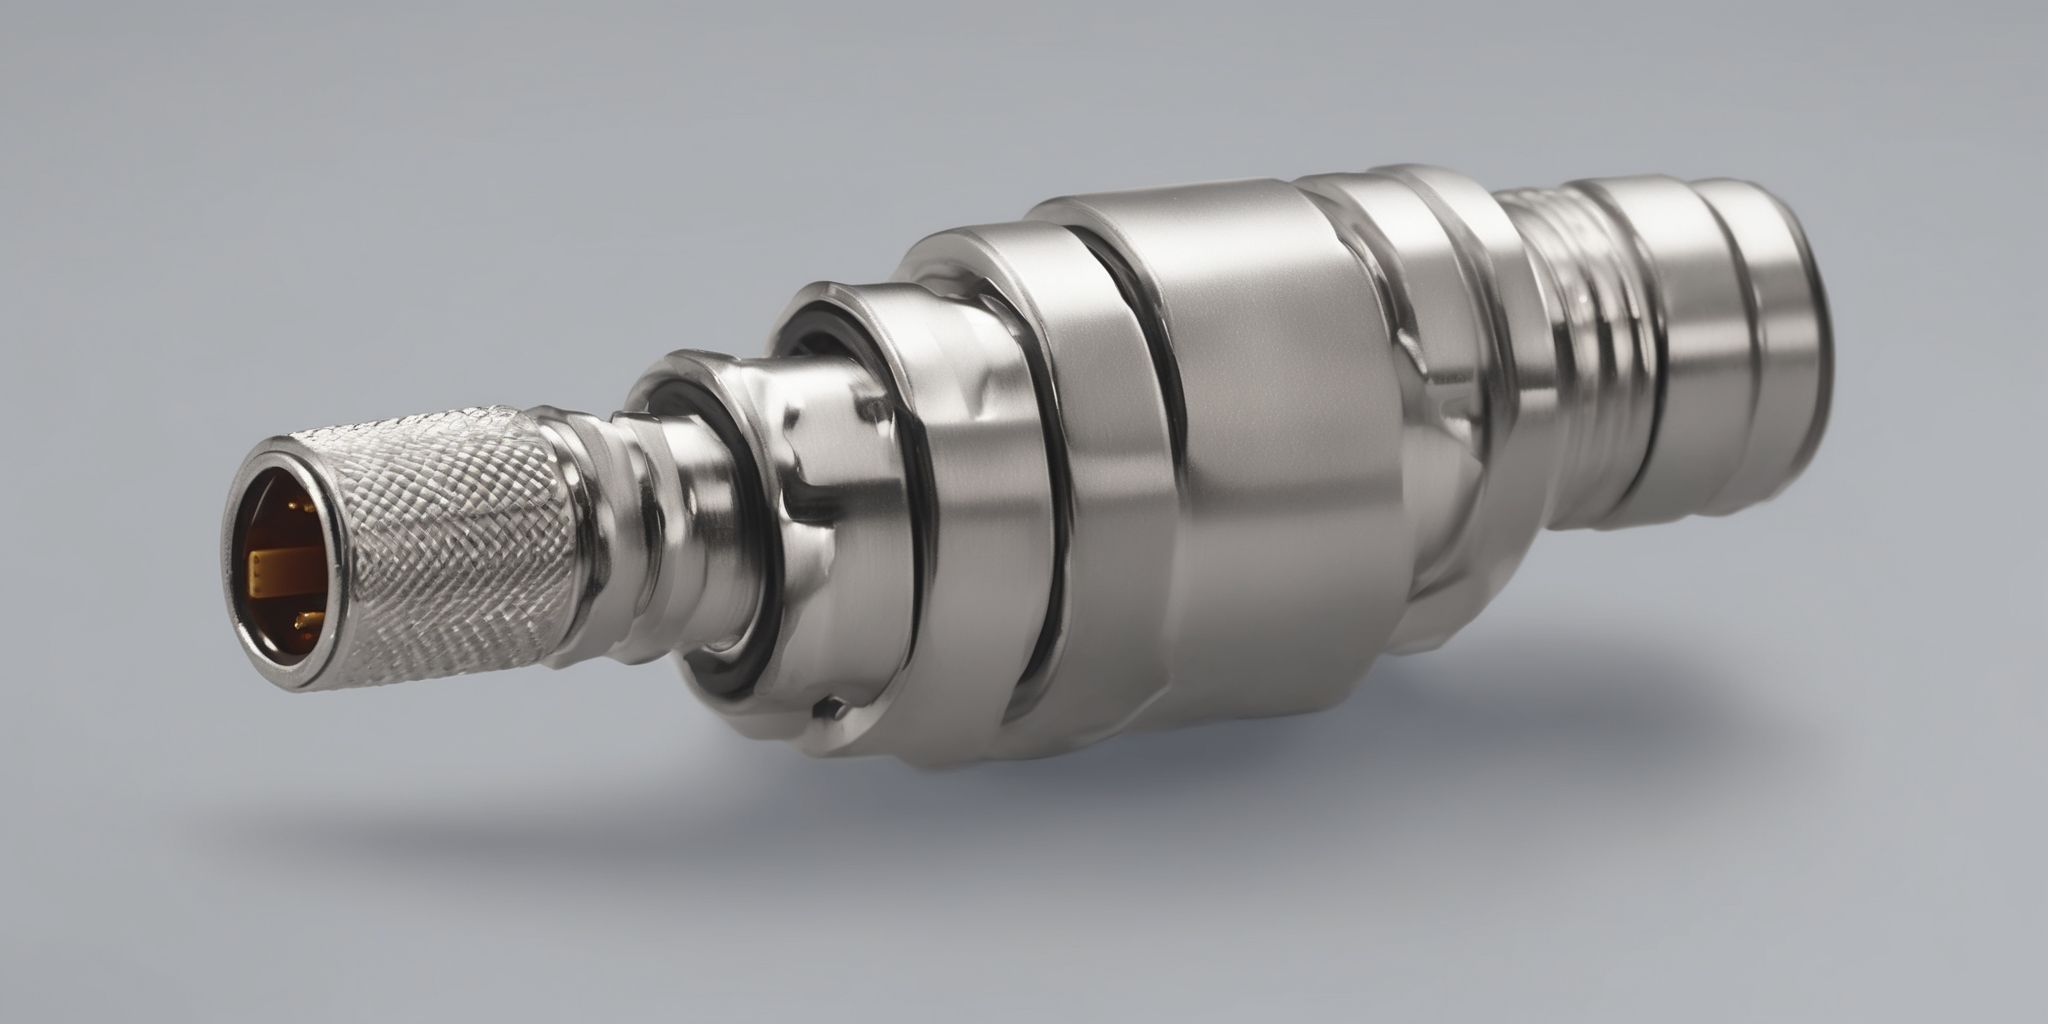 Connector  in realistic, photographic style